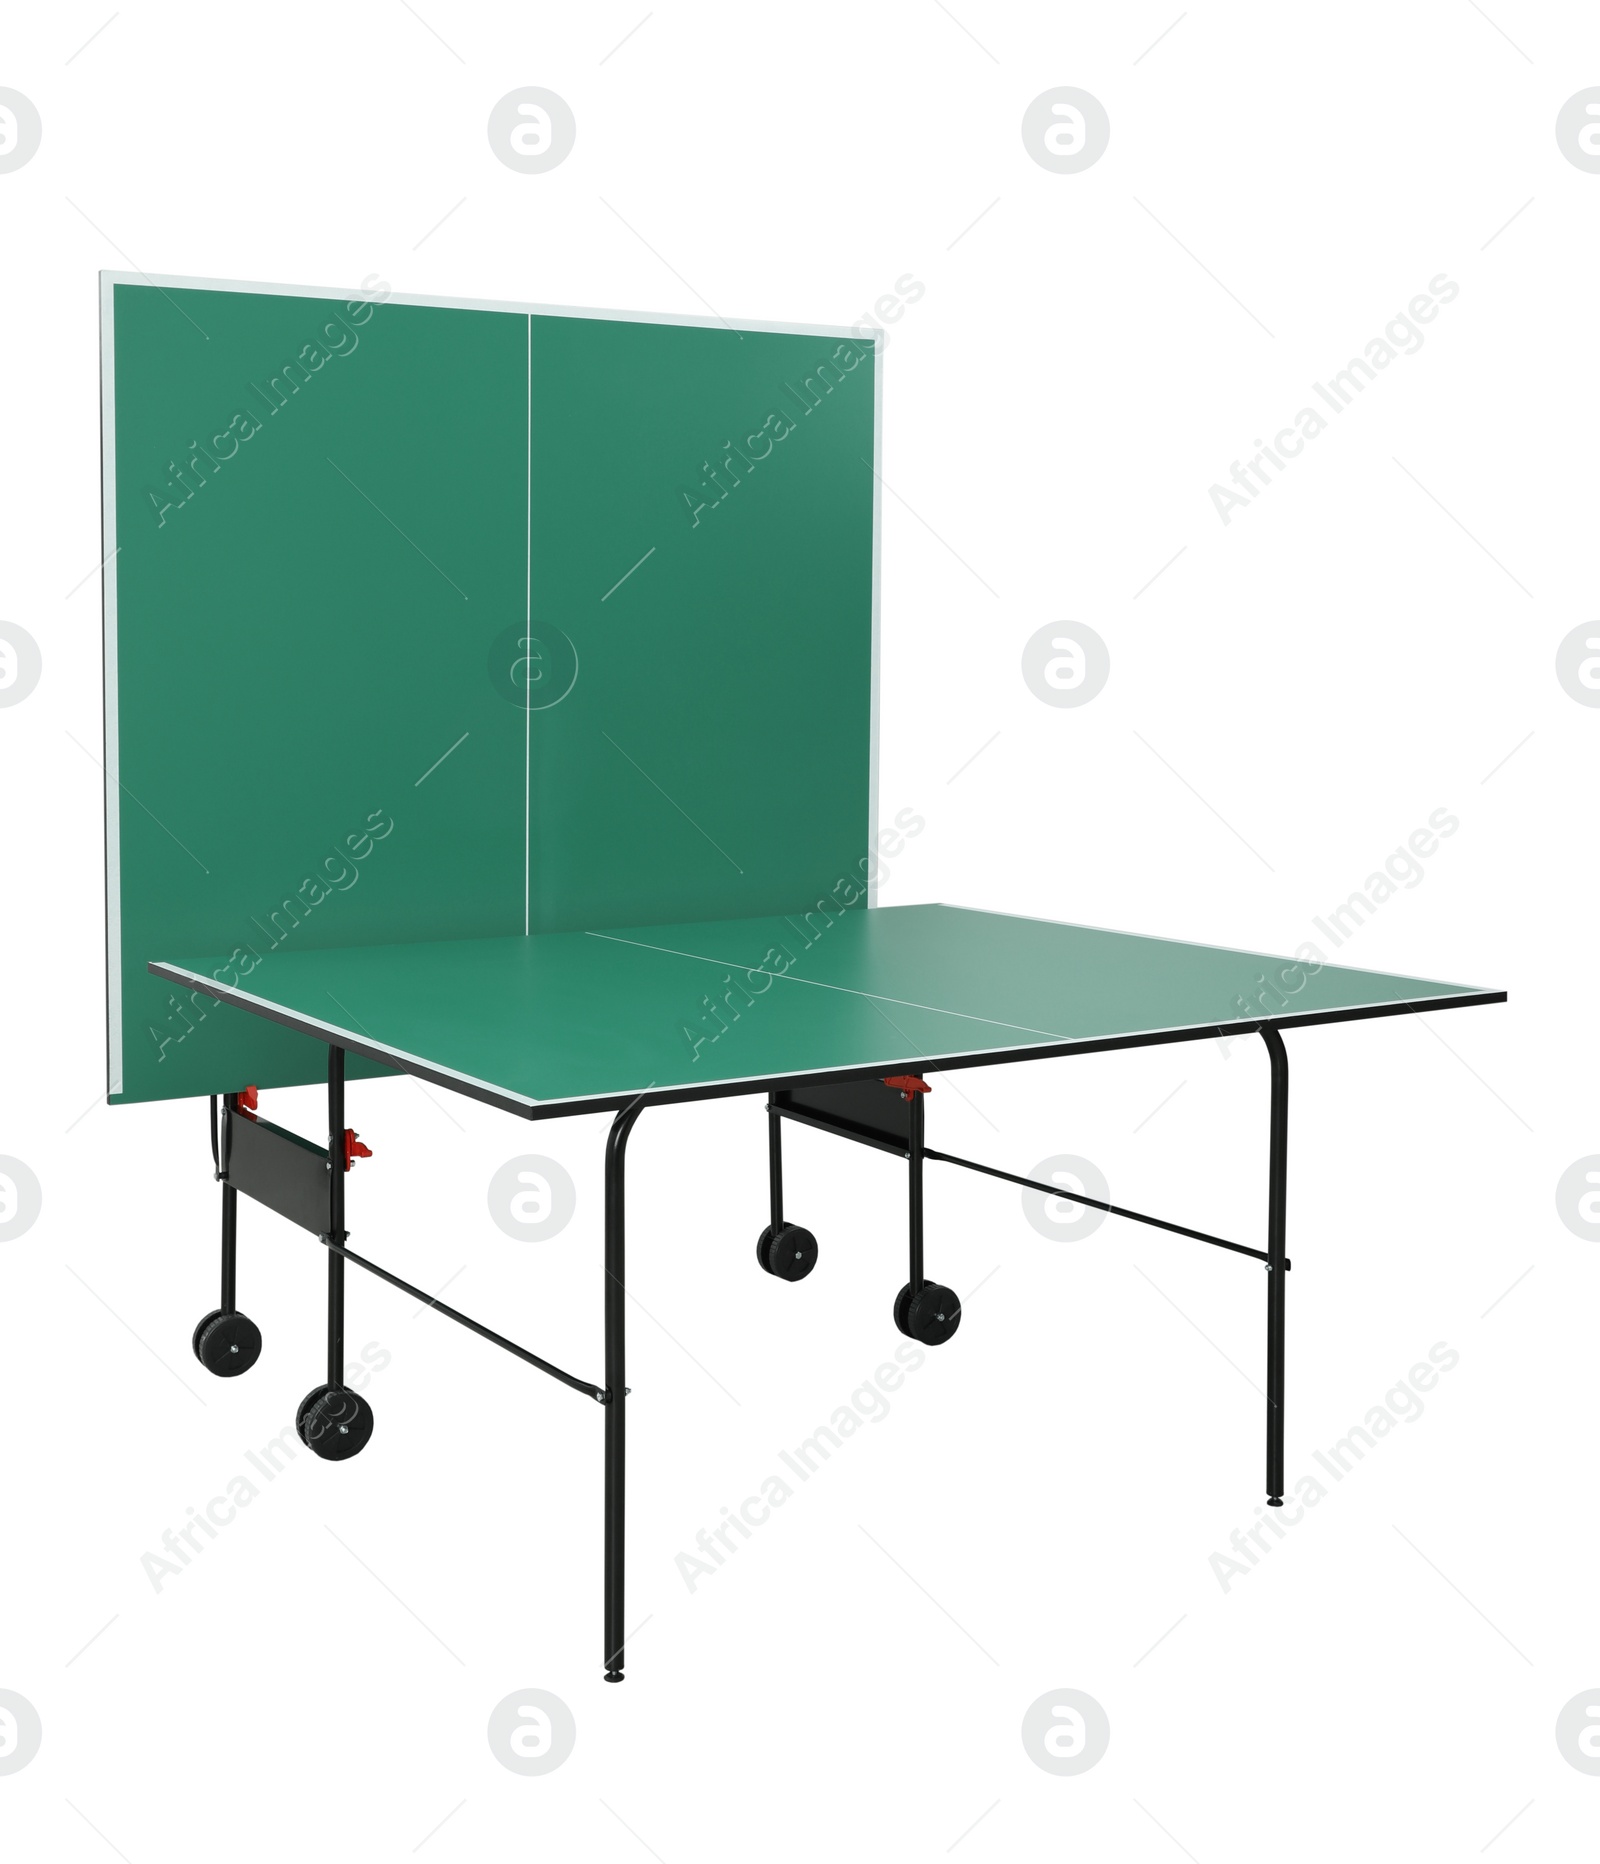 Image of Green ping pong table isolated on white